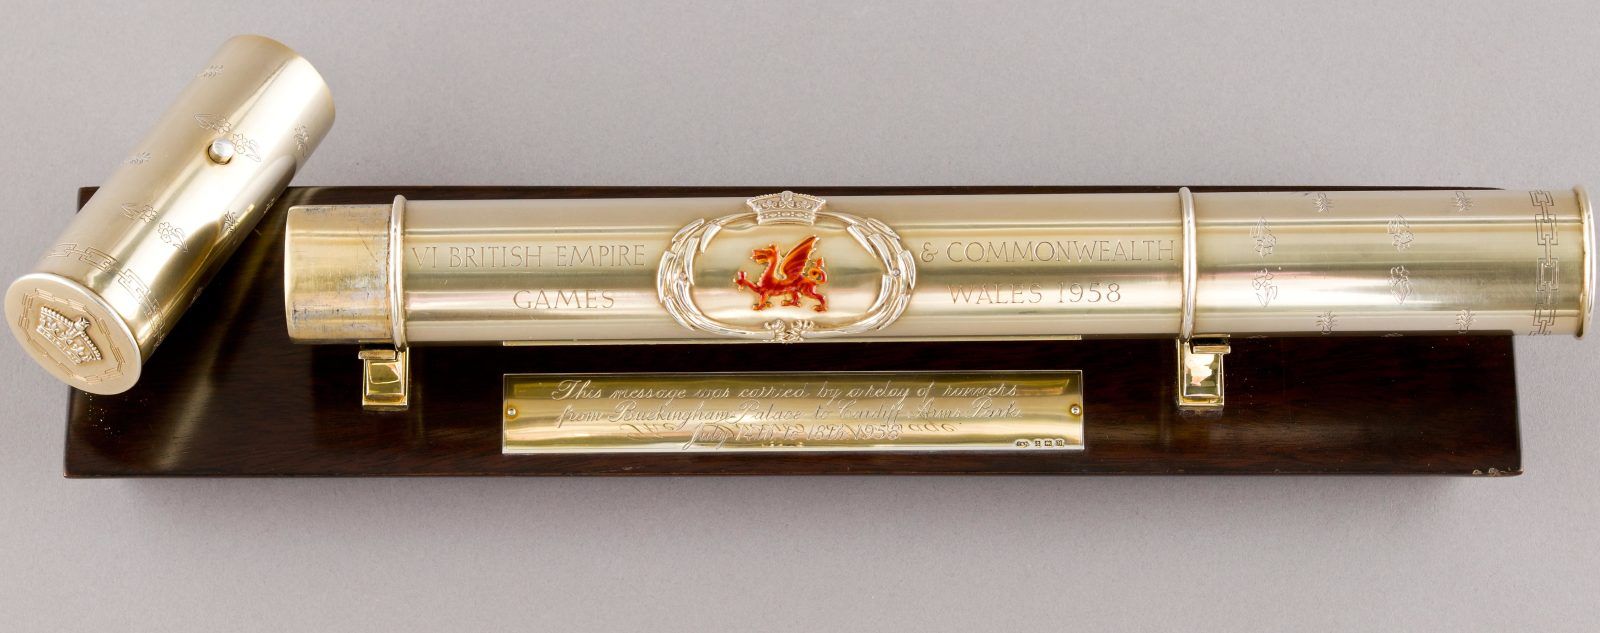 The 1958 British Empire and Commonwealth Games Queen’s Relay baton.